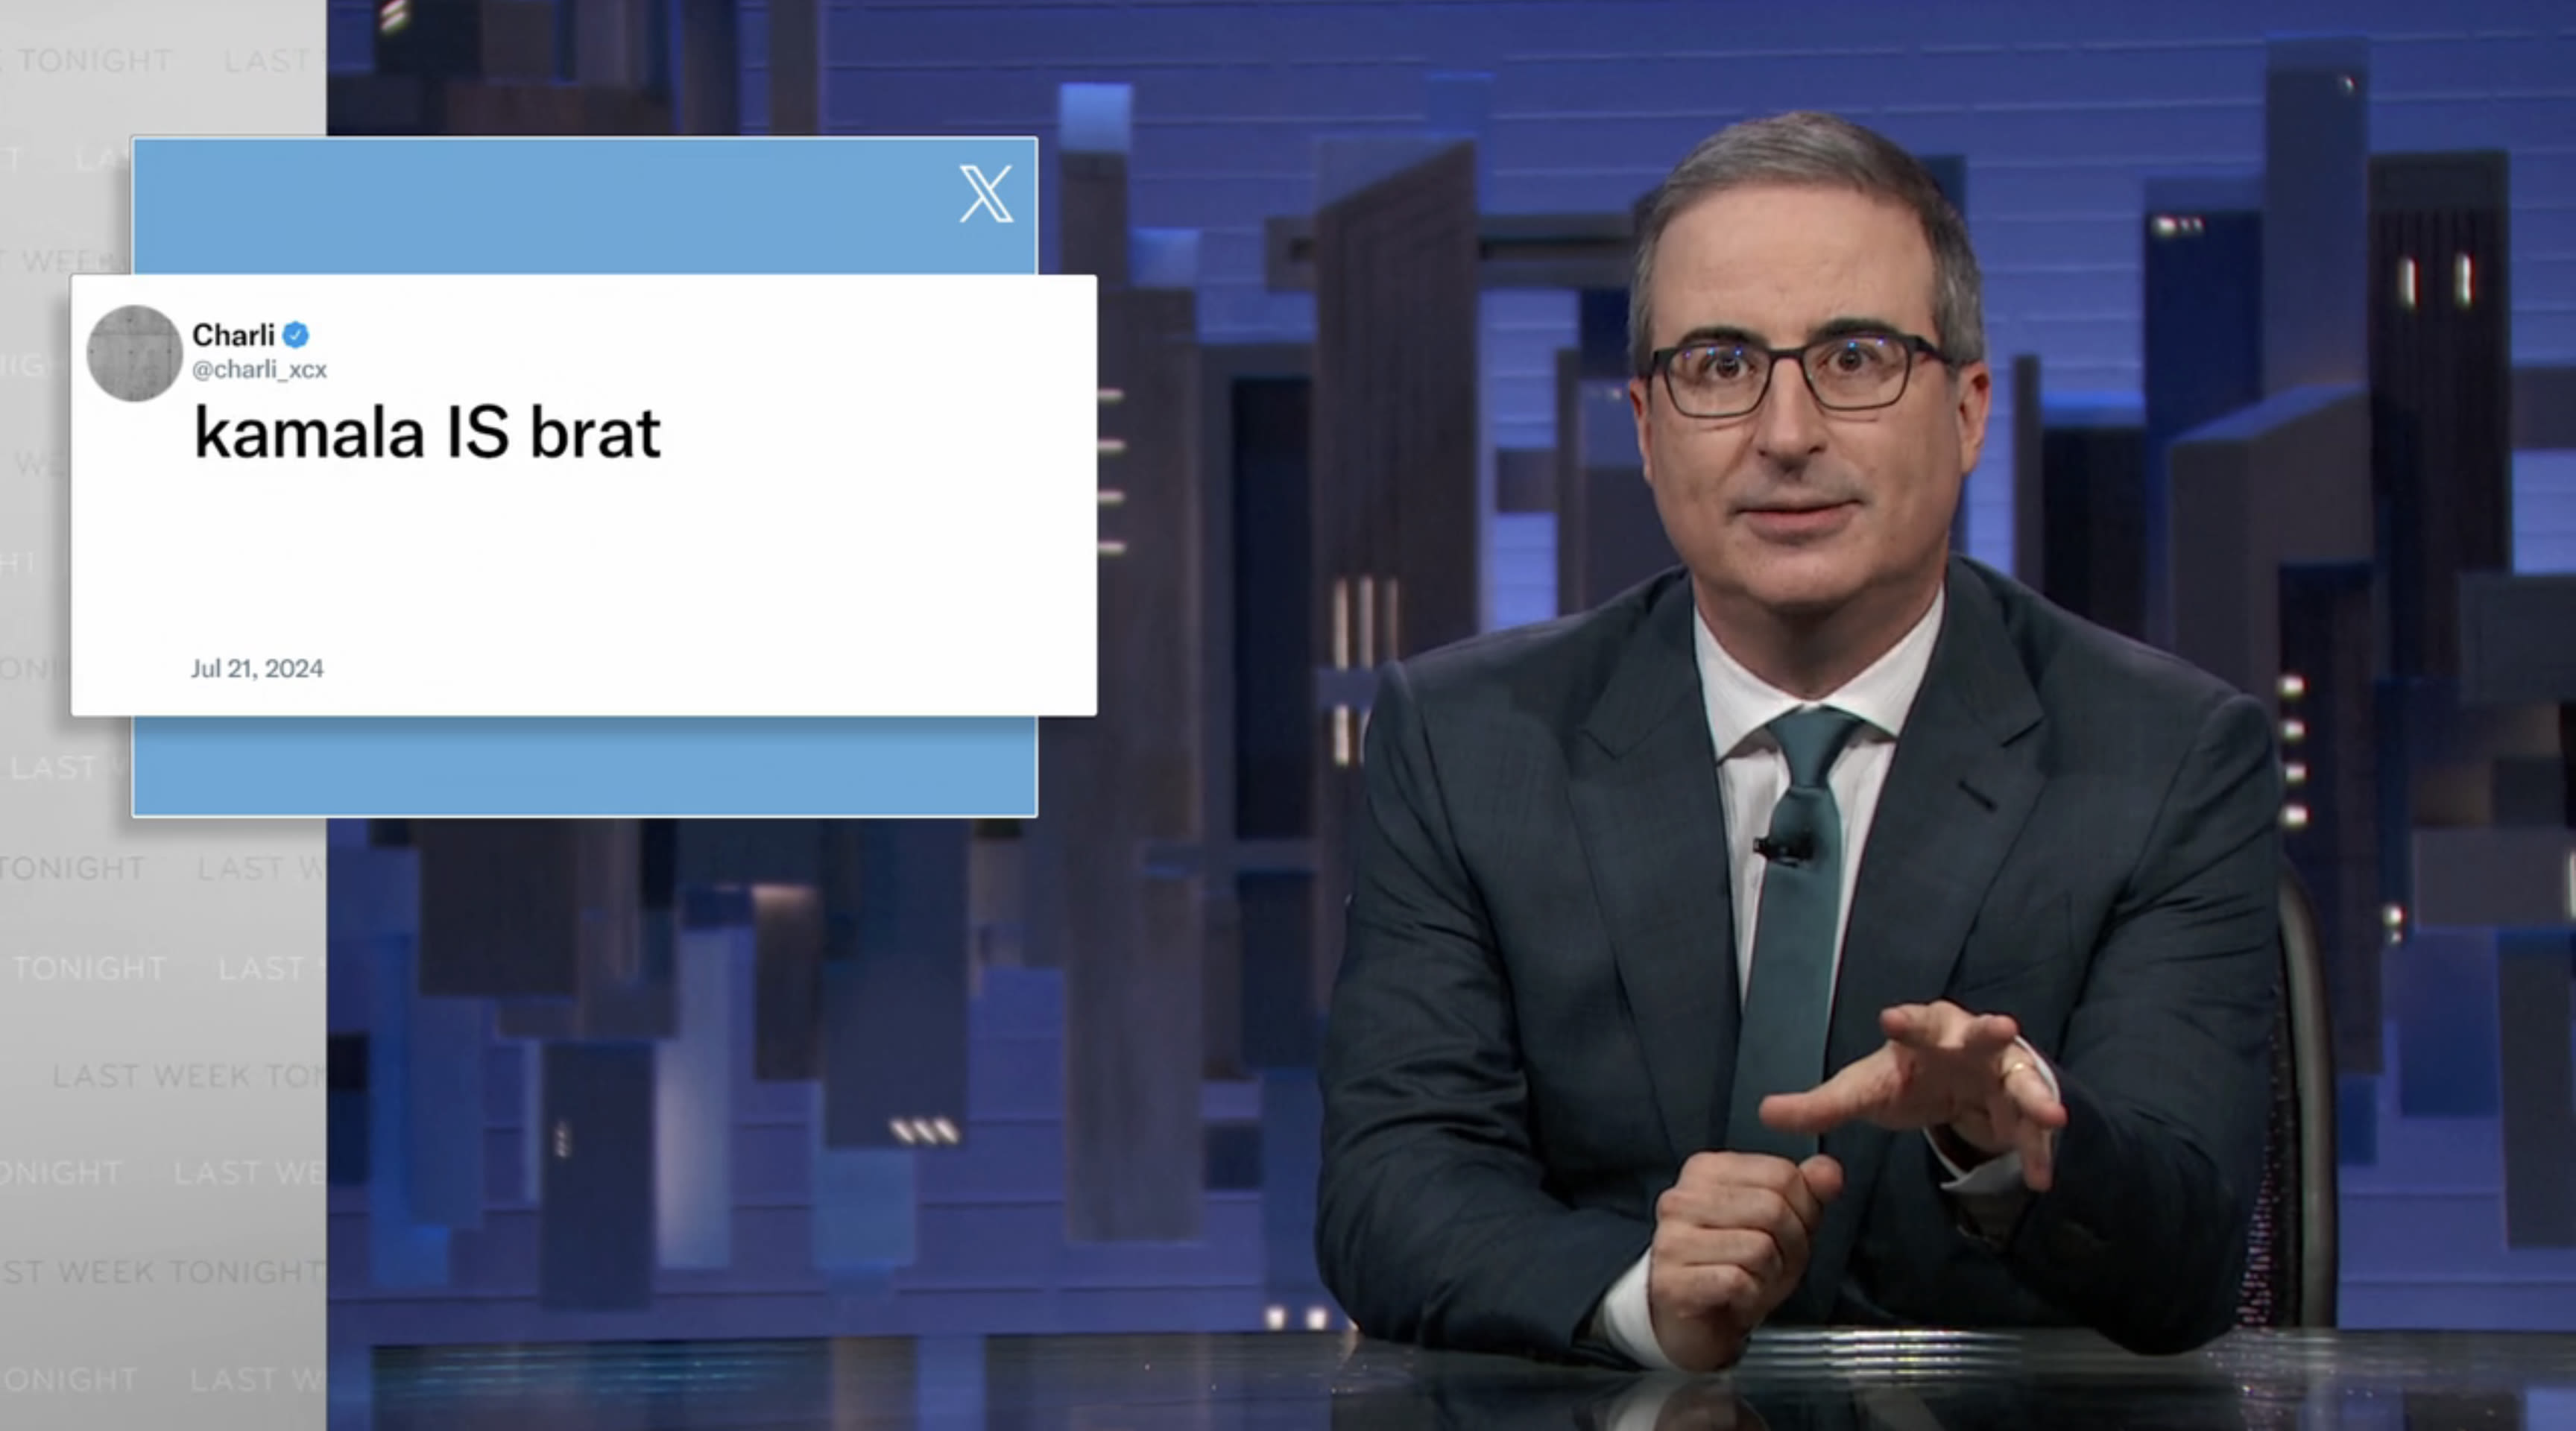 ‘Last Week Tonight’: John Oliver Declares “Jake Tapper Is Not Brat” After Charli XCX’s Viral ...